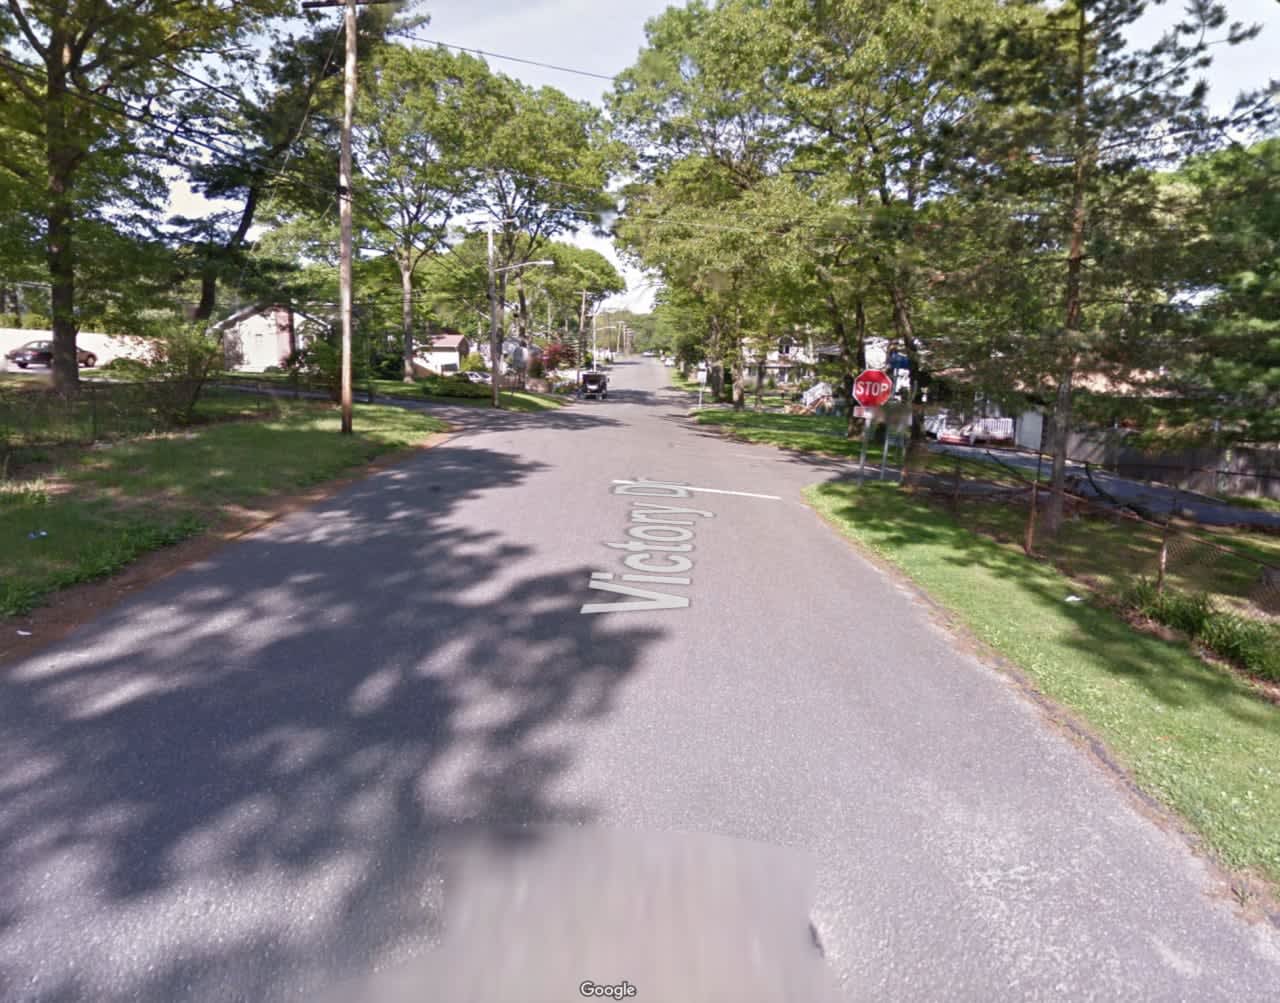 Two pedestrians were injured near the intersection of North 7th Street and Victory Drive in Ronkonkoma, police said.